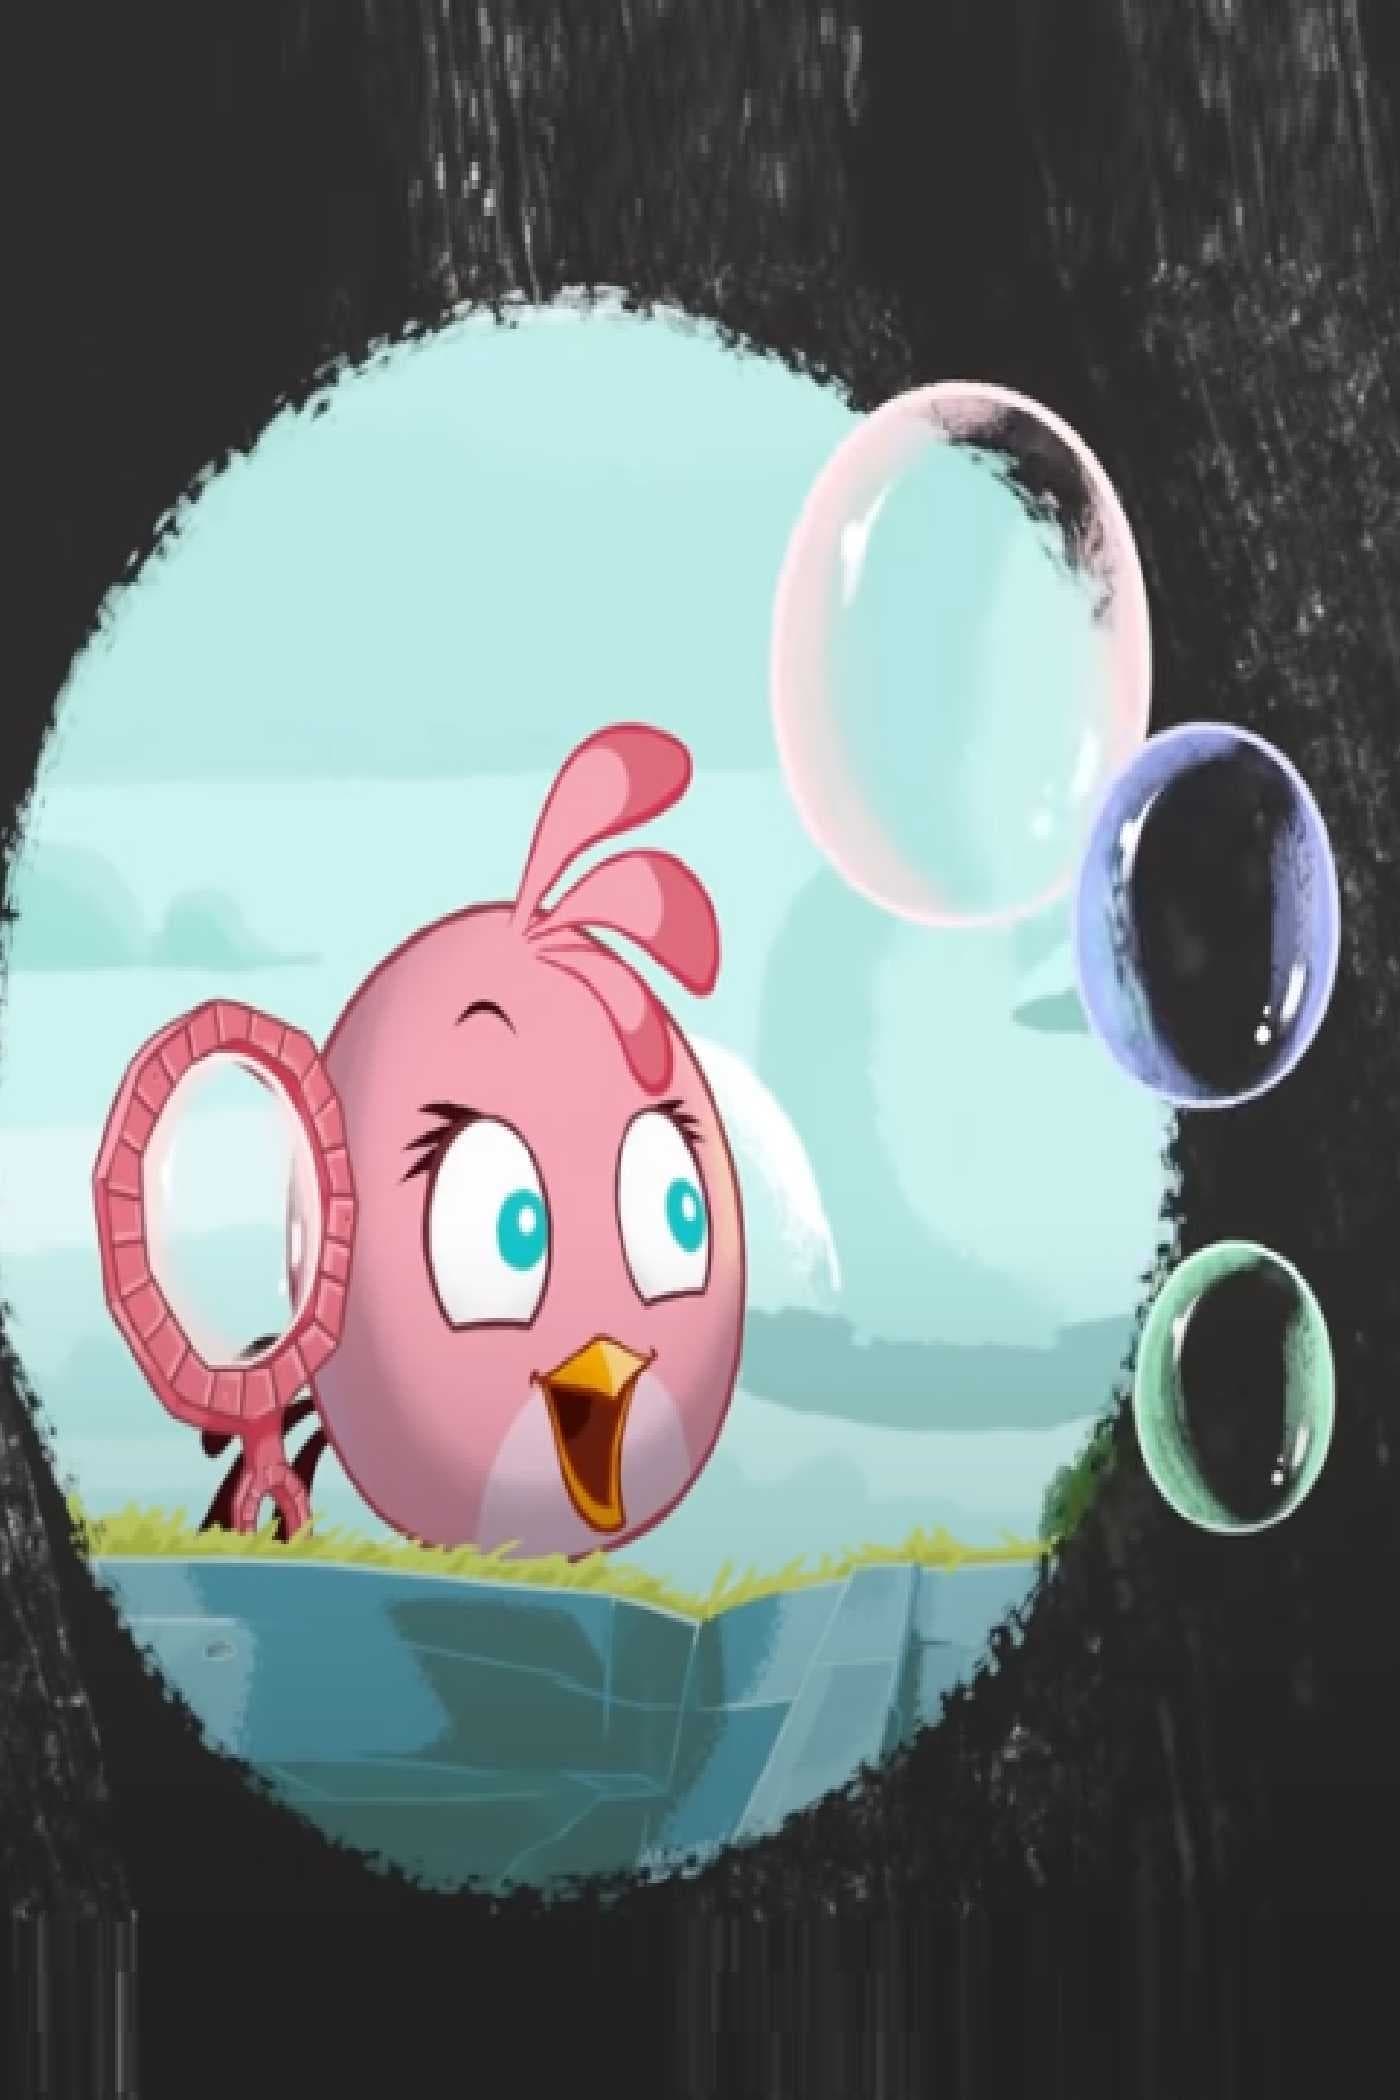 Meet the Pink Bird: A new member of the Angry Birds!